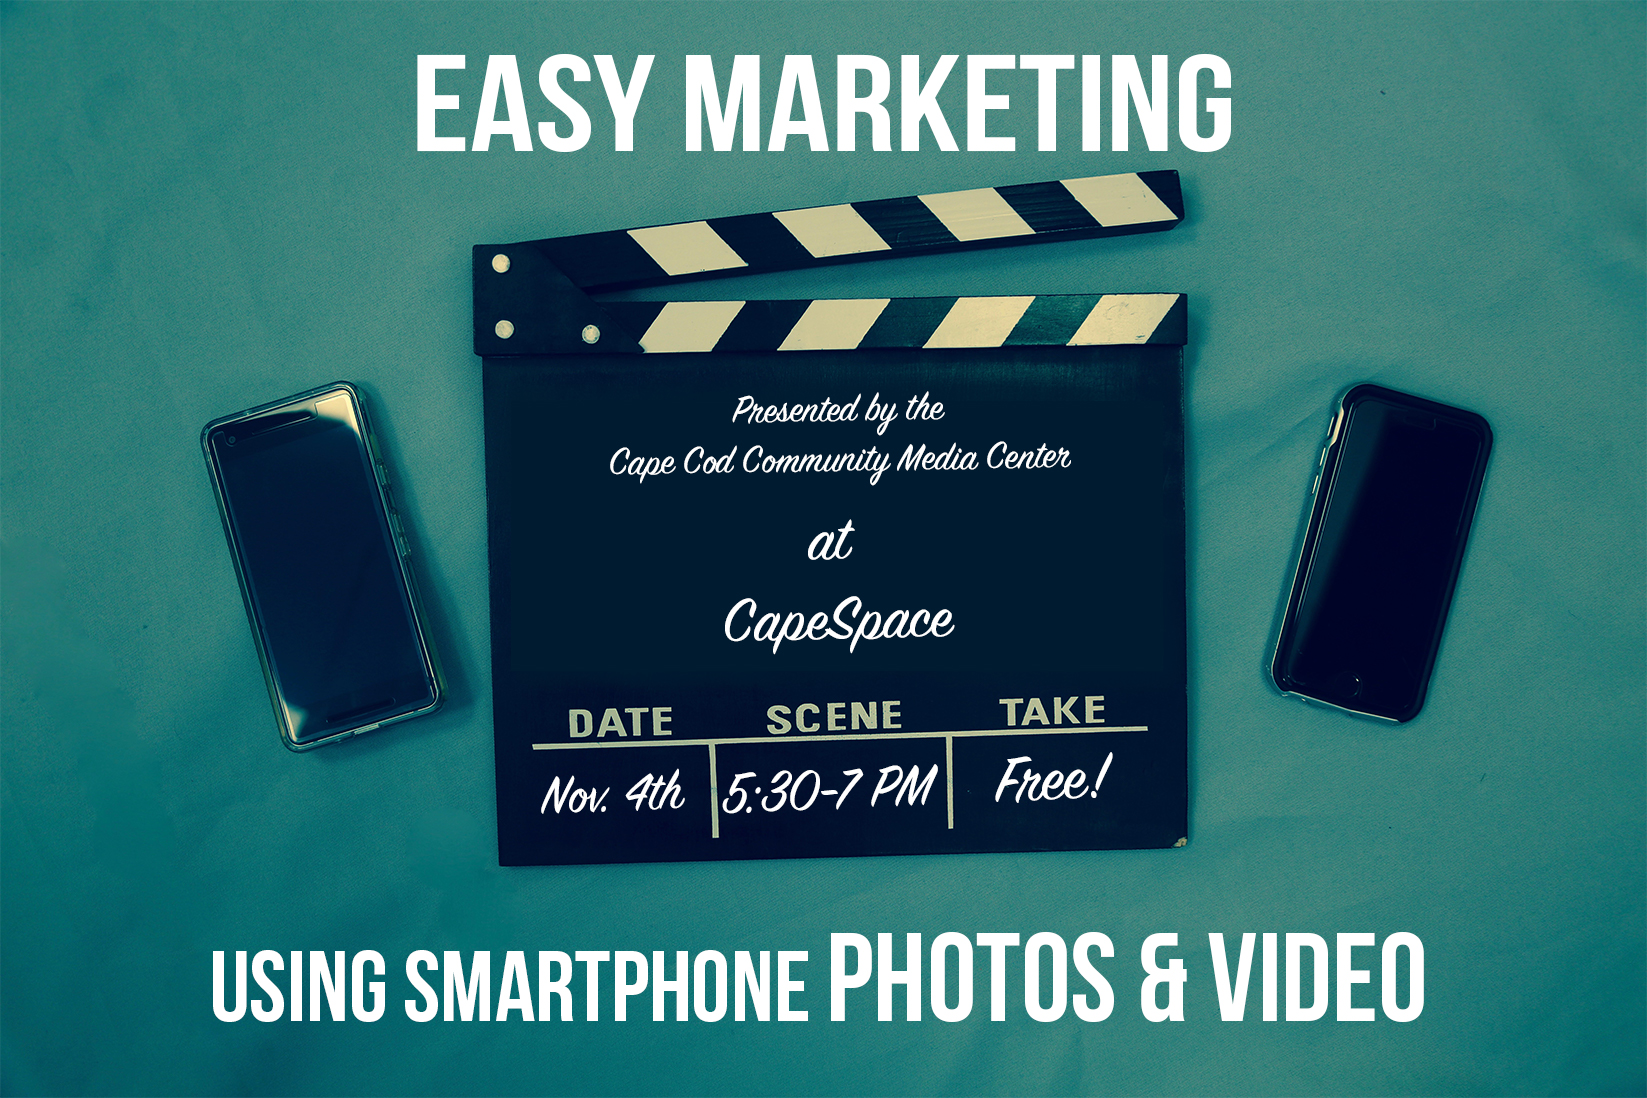 Media Flier Captioned "Easy Marketing using Smartphone Photos and Video"